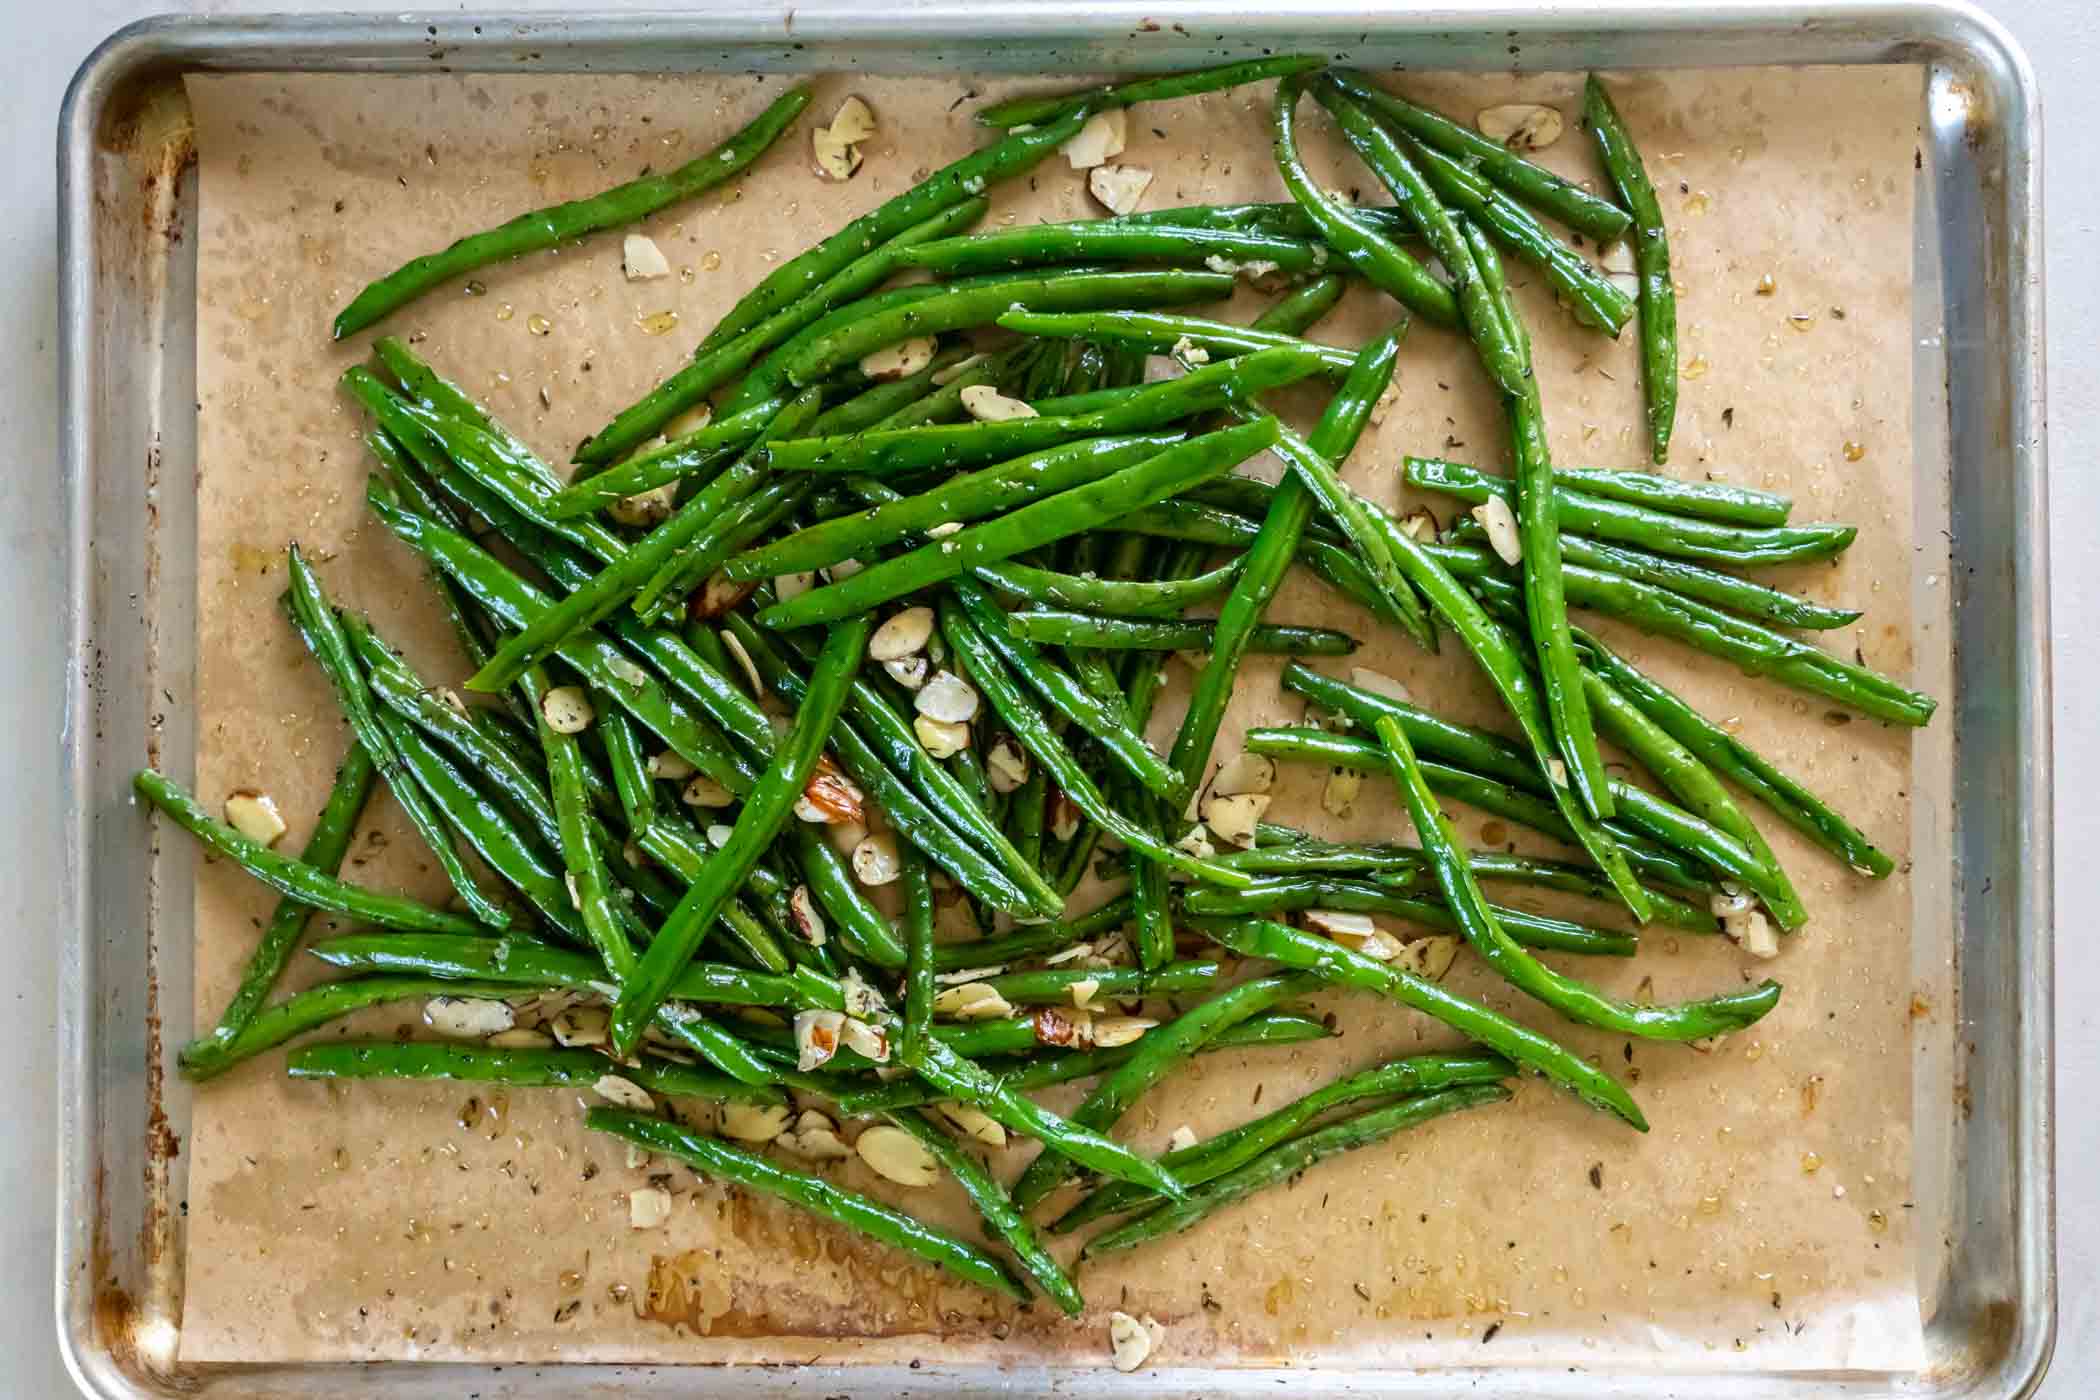 Partially baked green beans tossed with sliced almonds and garlic.